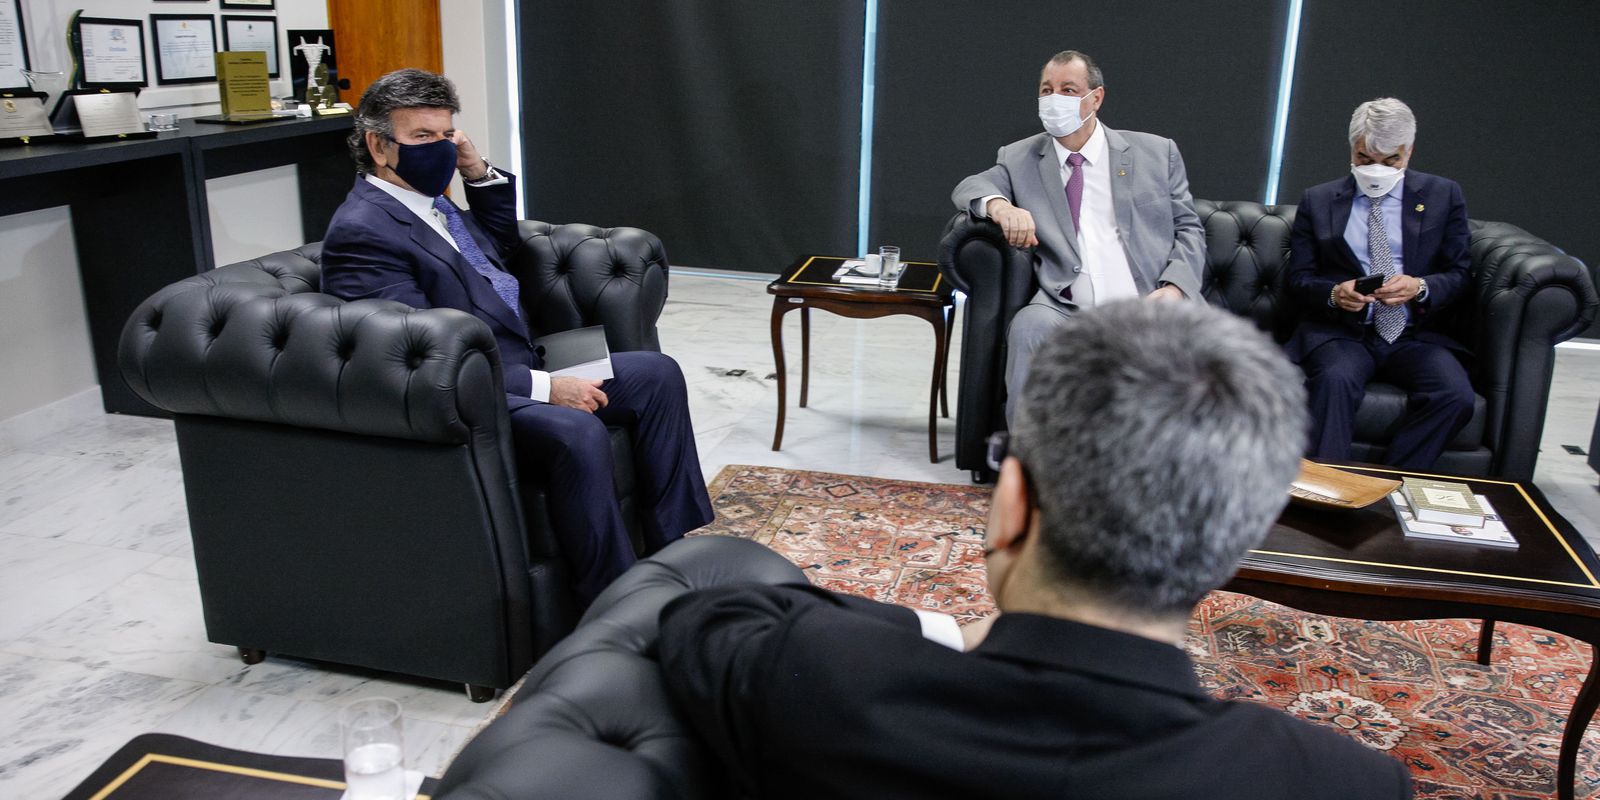 President of the STF receives report from the CPI on the Pandemic